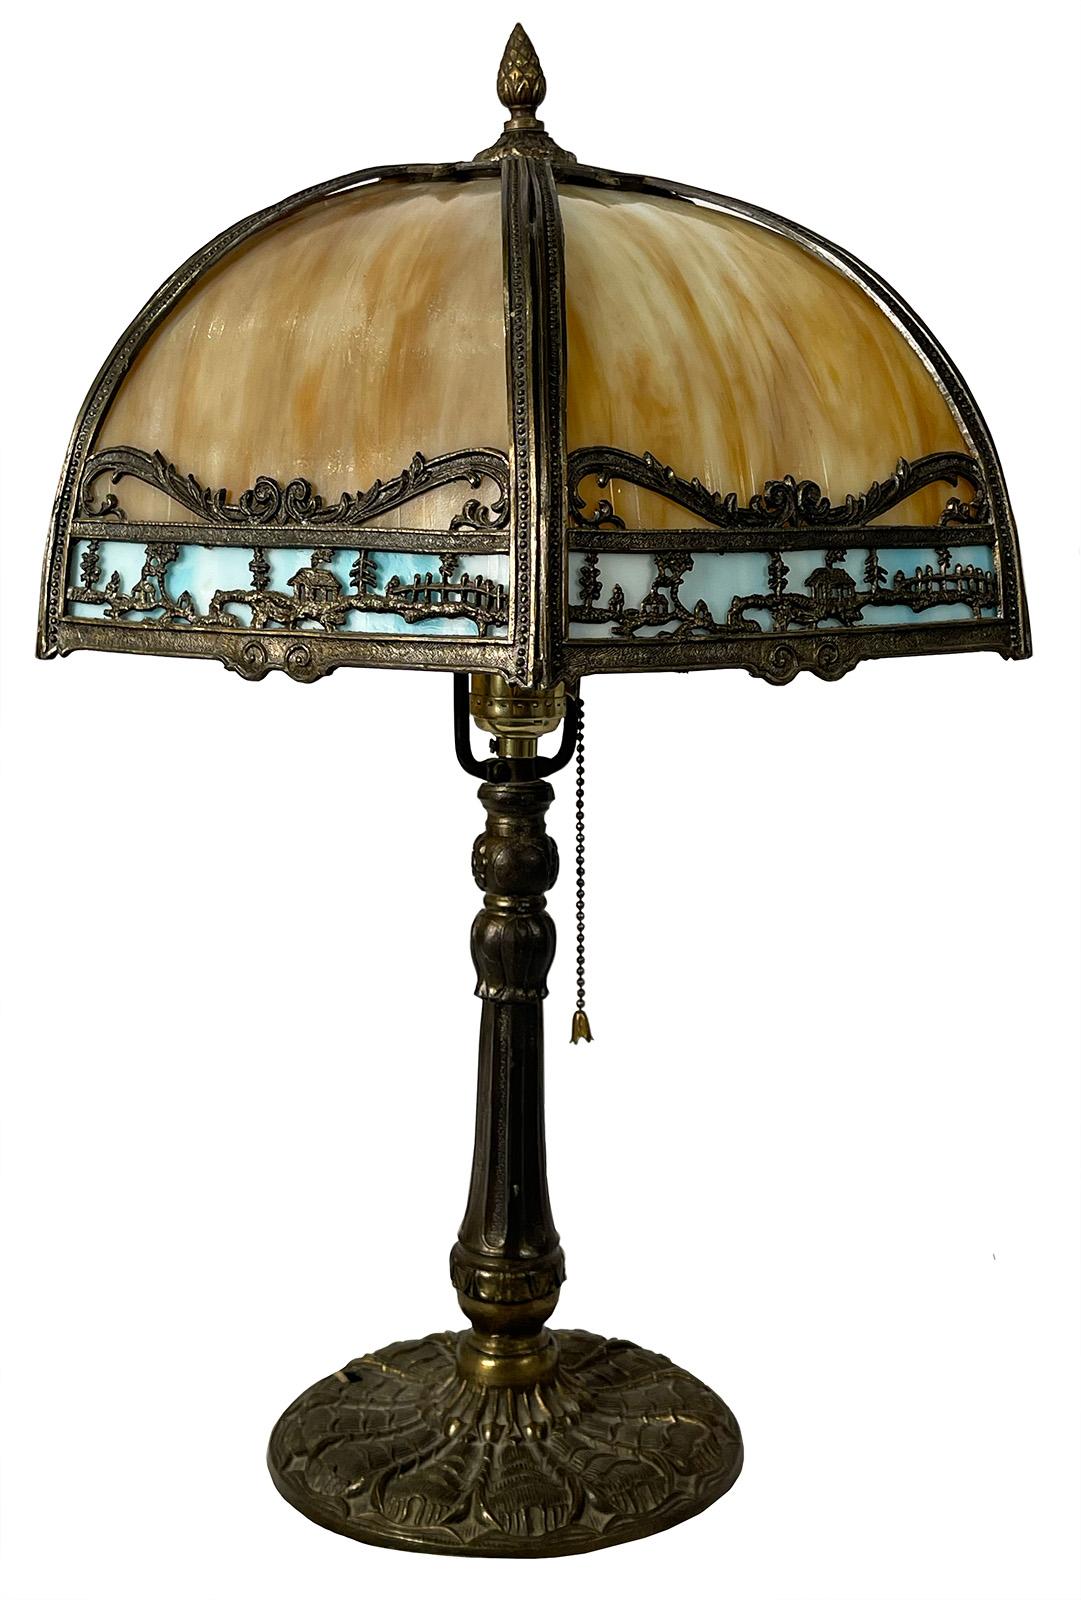 An early 20th century Art Nouveau style table lamp made with blue and yellow slag glass with a bronze cottage scene motif.

Dimensions: 21